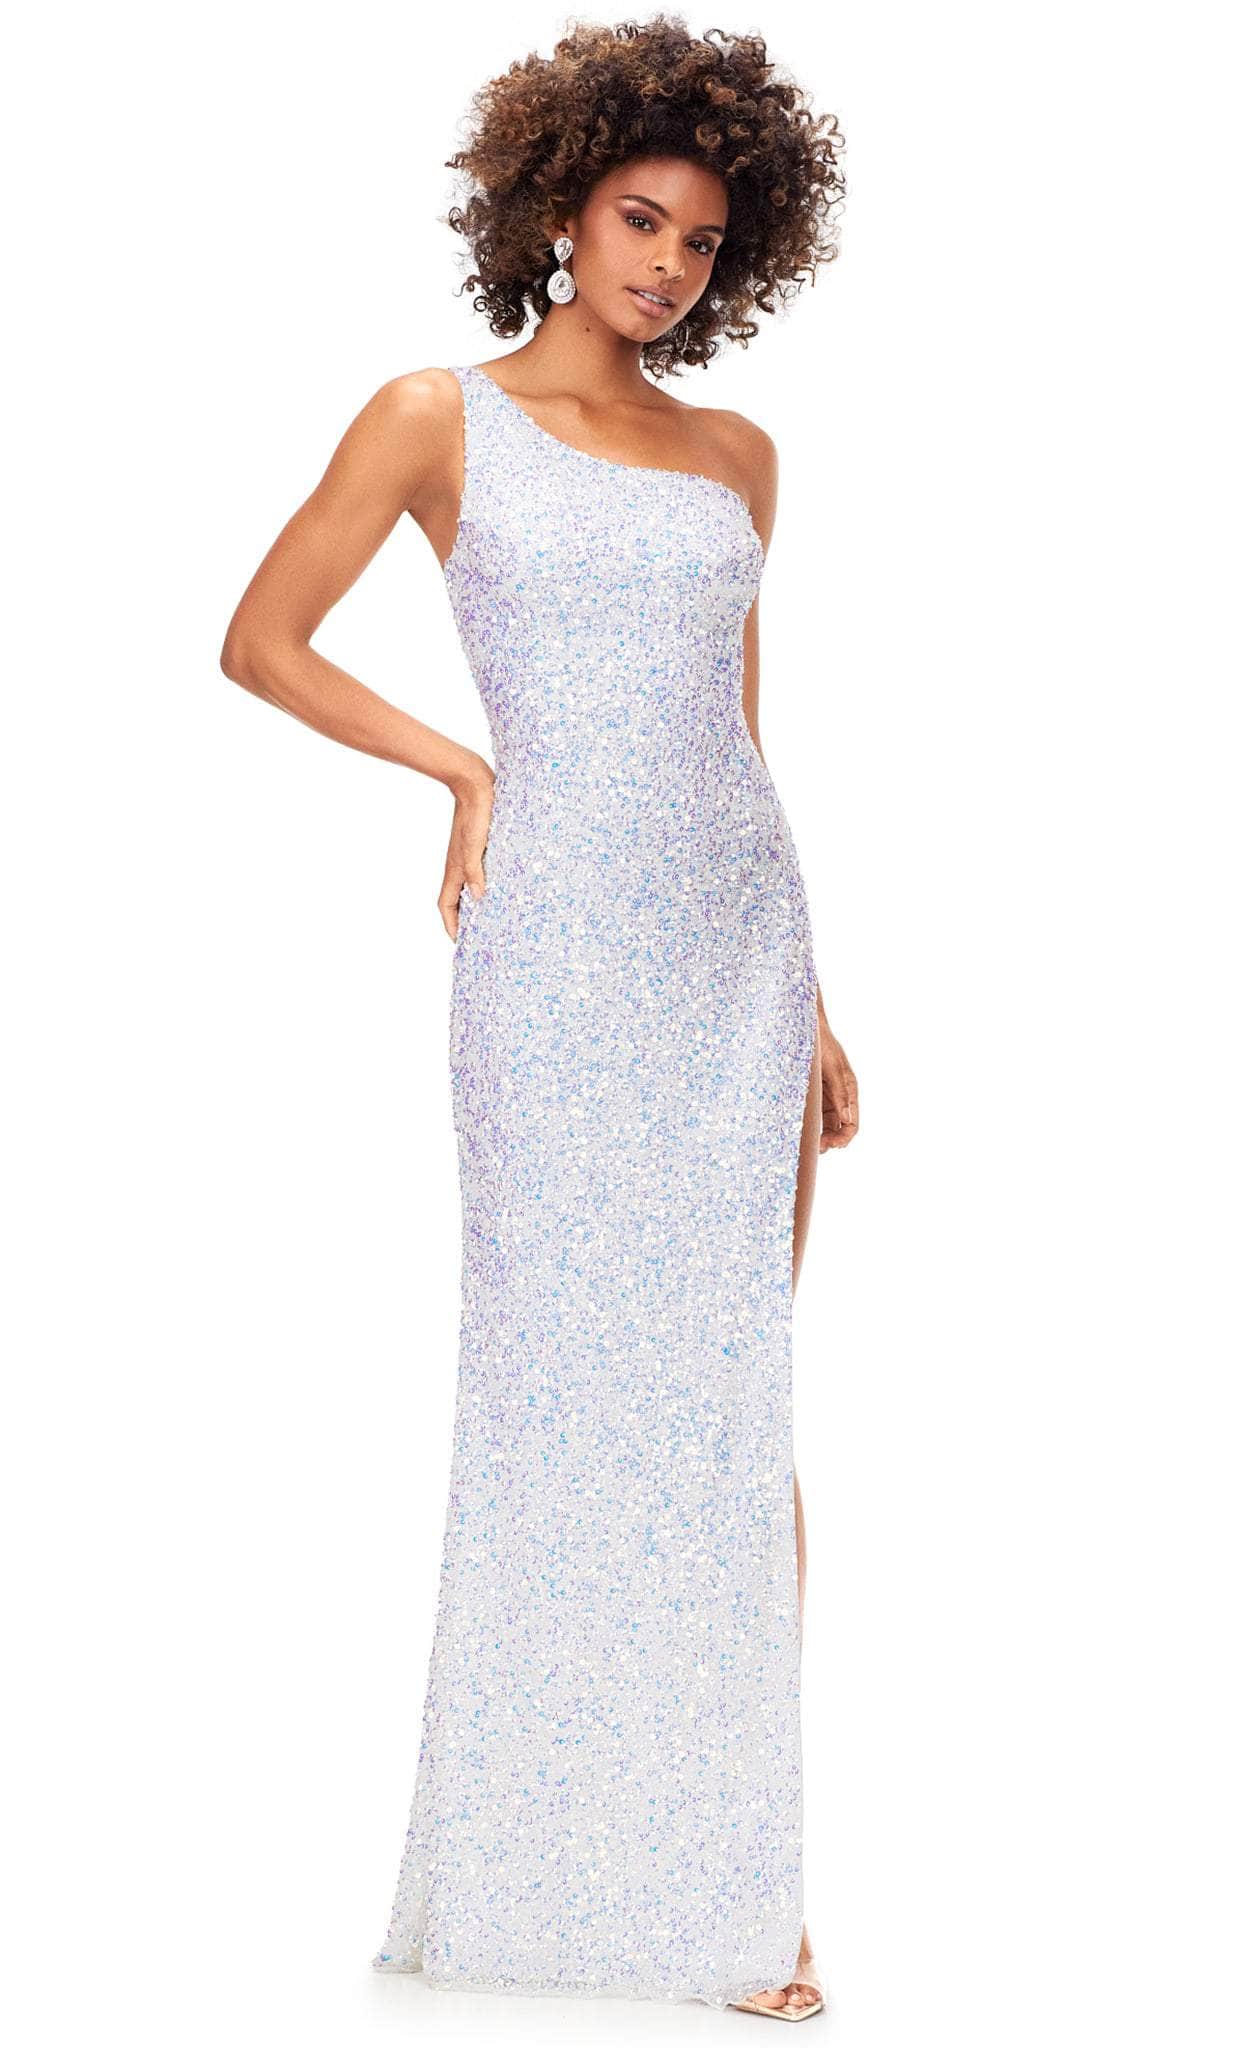 Image of Ashley Lauren 11285 - Cutout Back Sequin Prom Gown